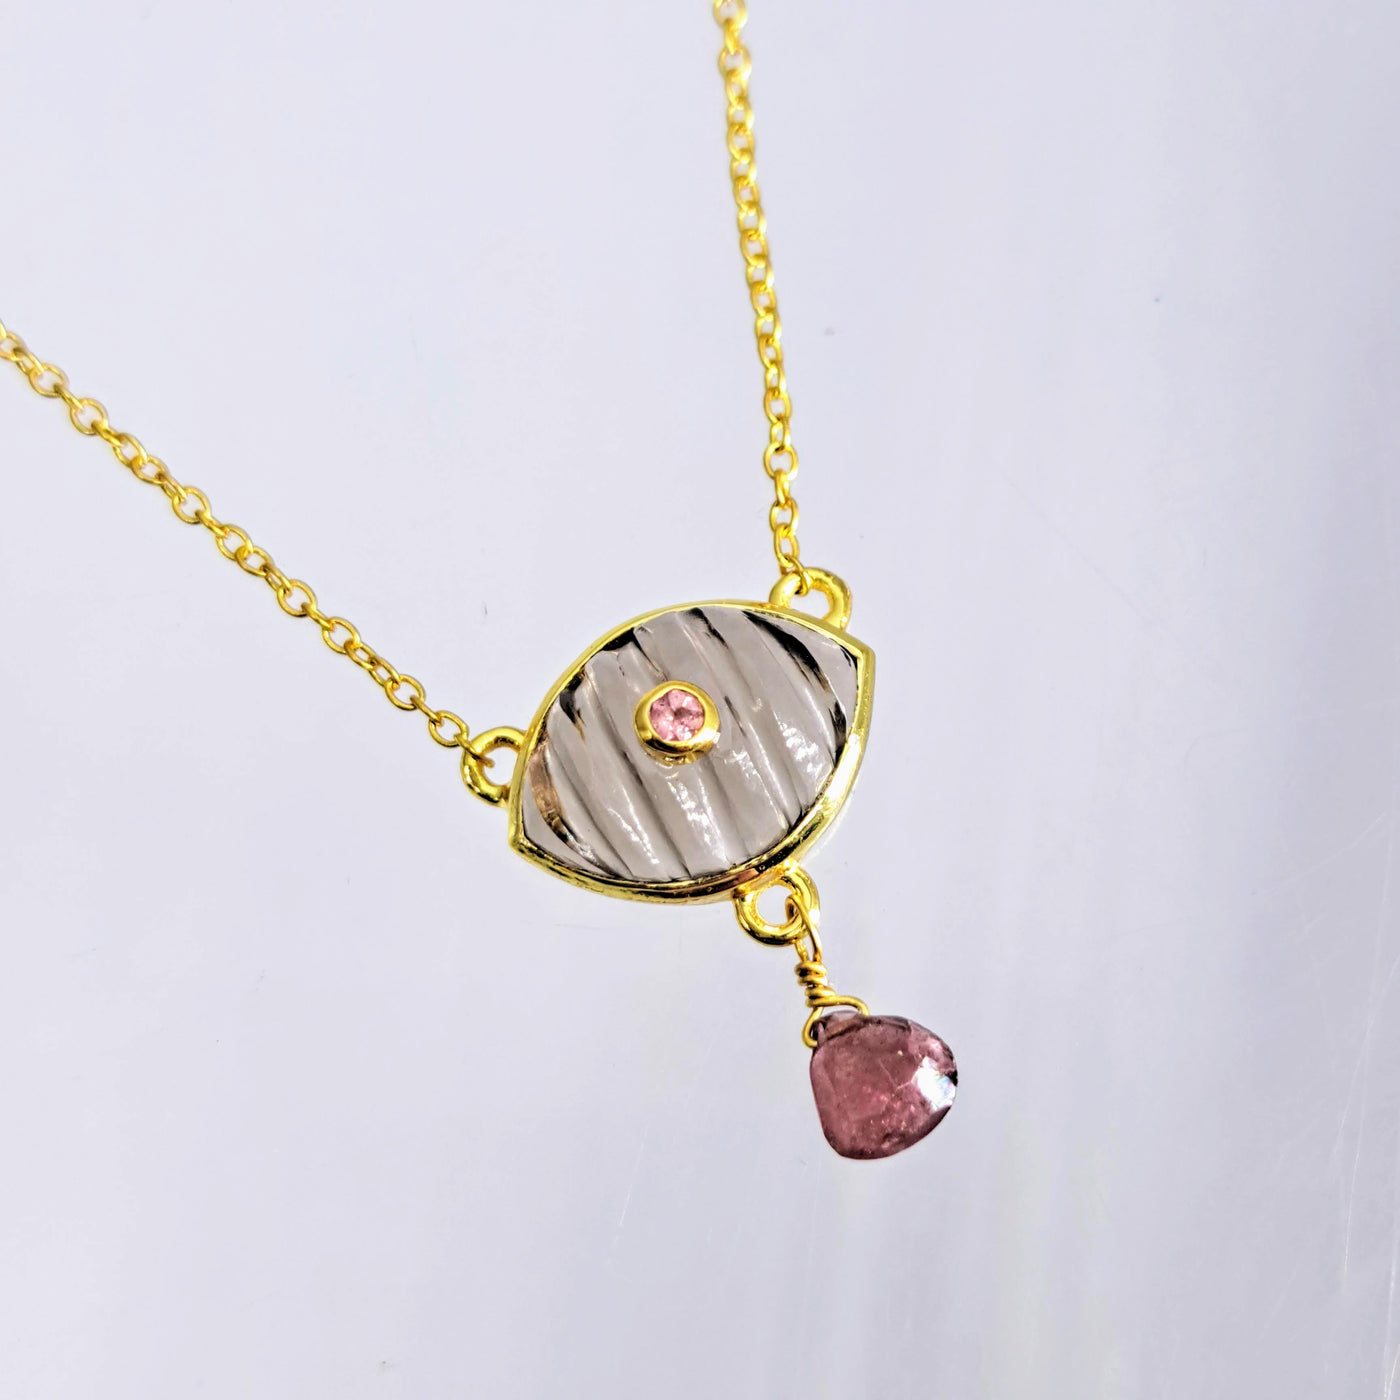 "Shell of Venus" 16-18" Necklace- Choose Chalcedony Or Smoky Quartz, with Tourmaline, 18K Gold Sterling